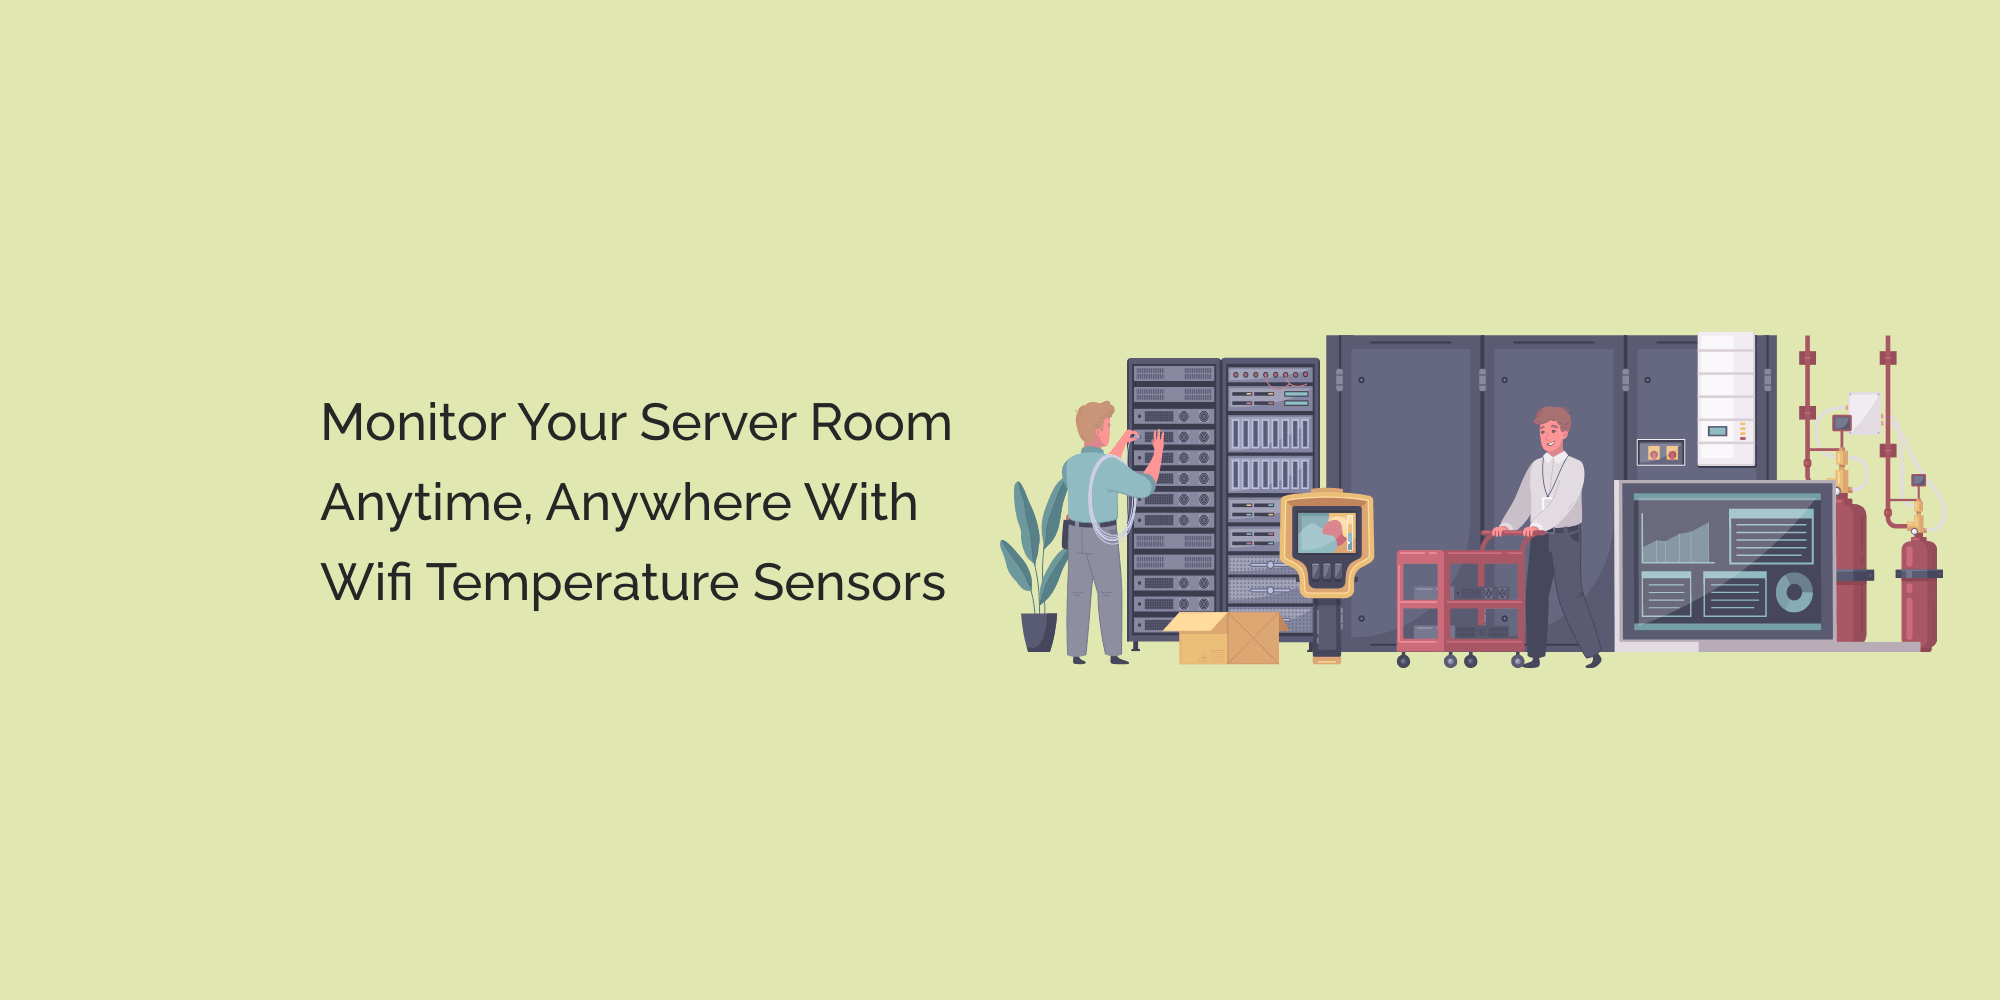 Monitor Your Server Room Anytime, Anywhere with Wifi Temperature Sensors